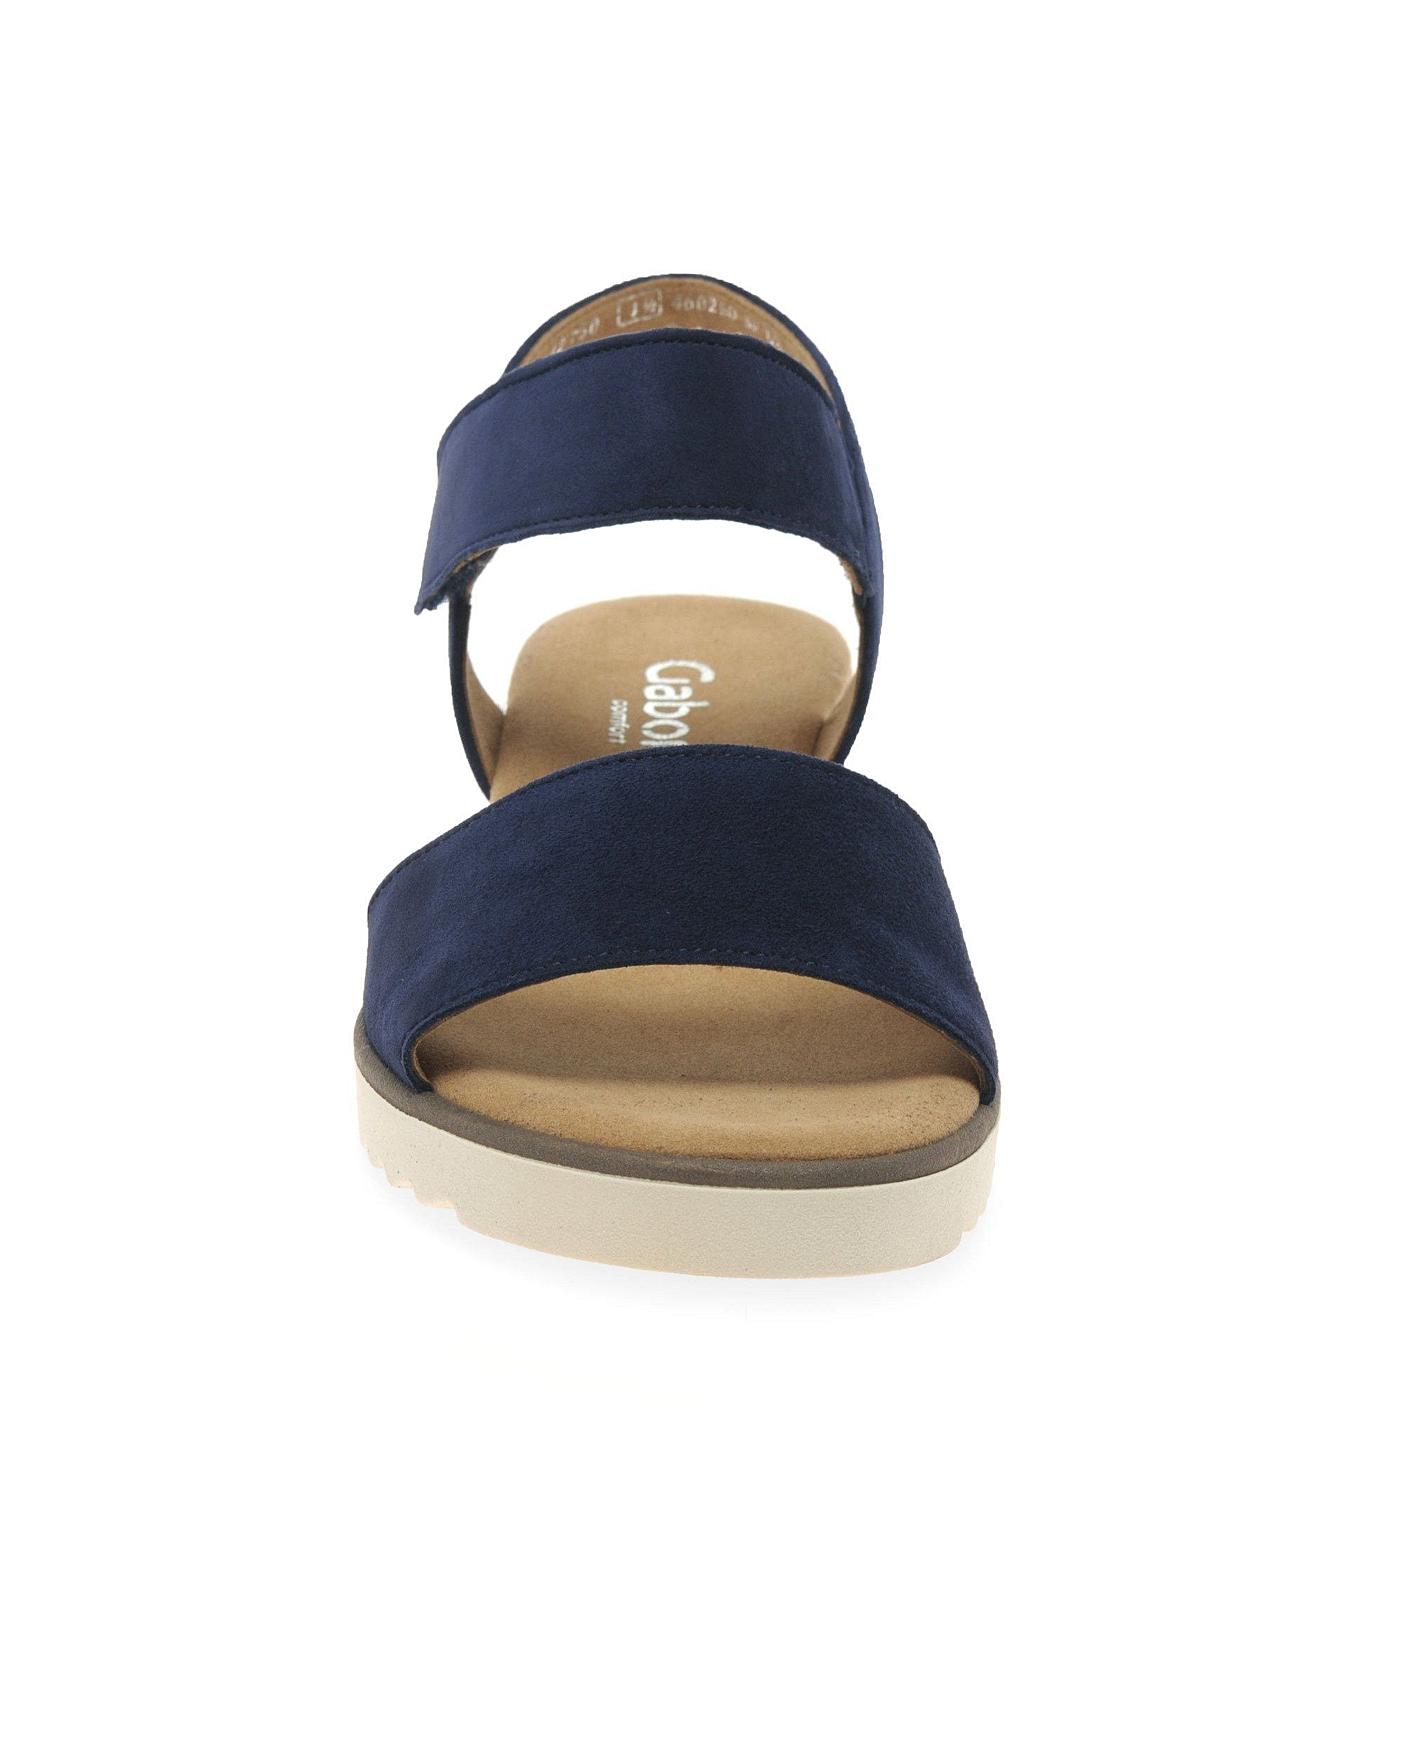 Gabor Raynor Wider Fit Wedge Sandals | Ambrose Wilson